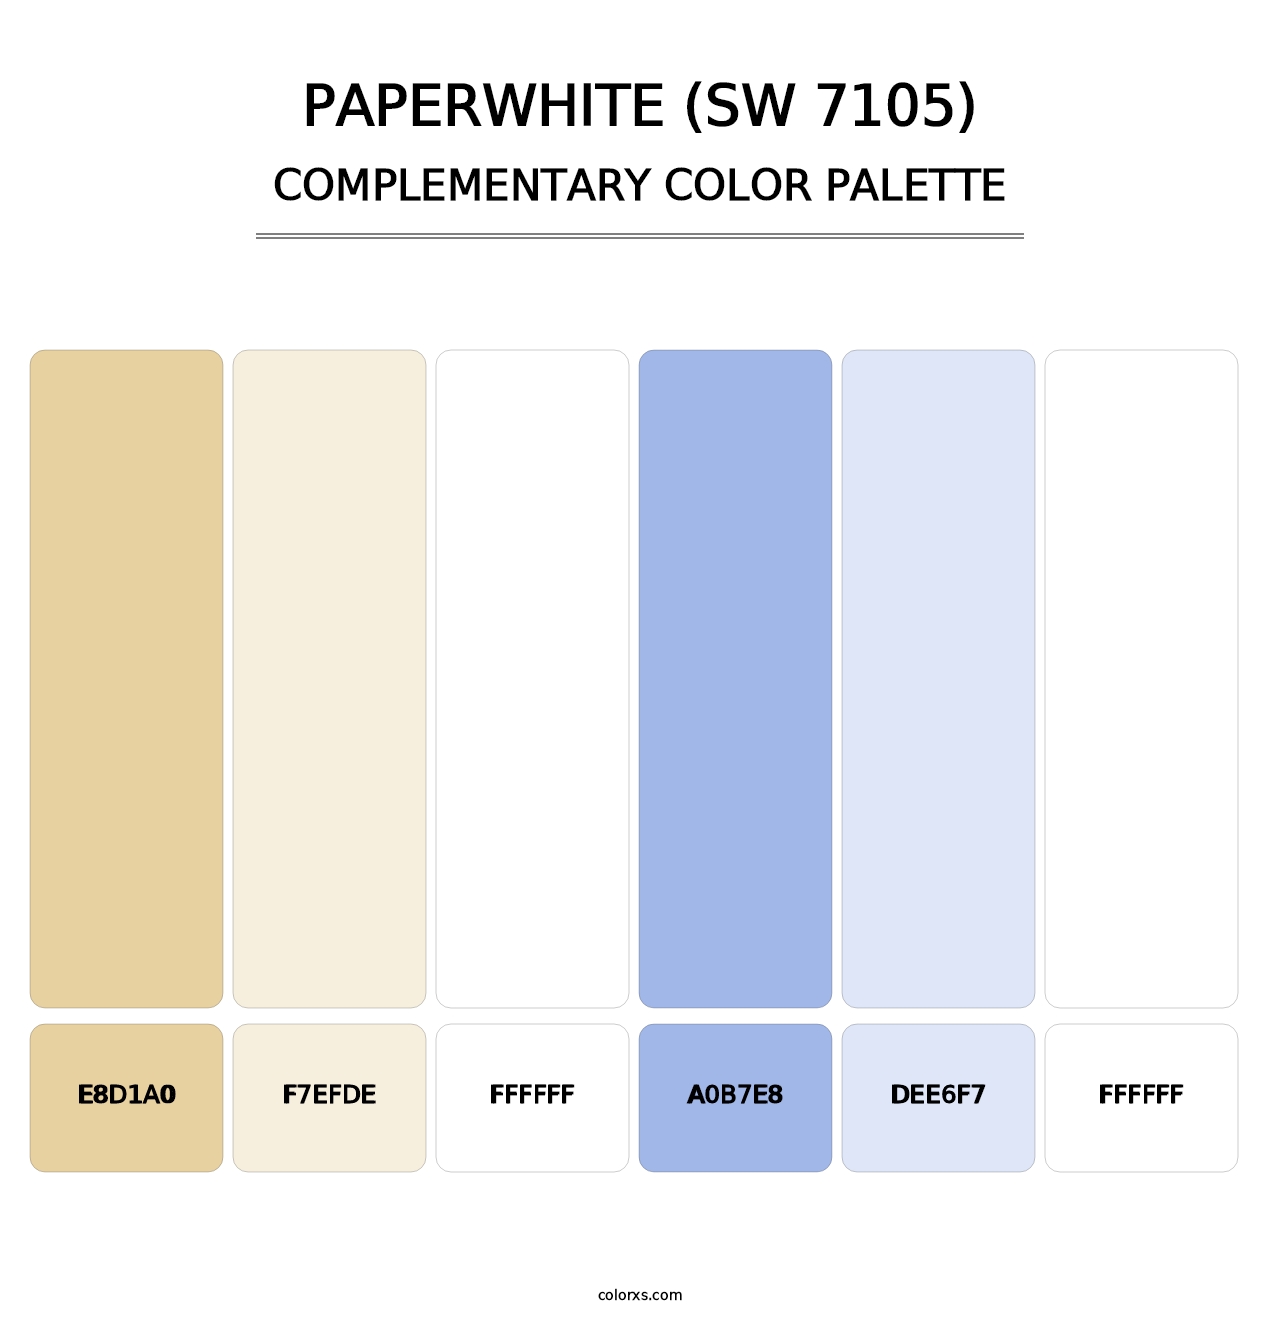 Paperwhite (SW 7105) - Complementary Color Palette